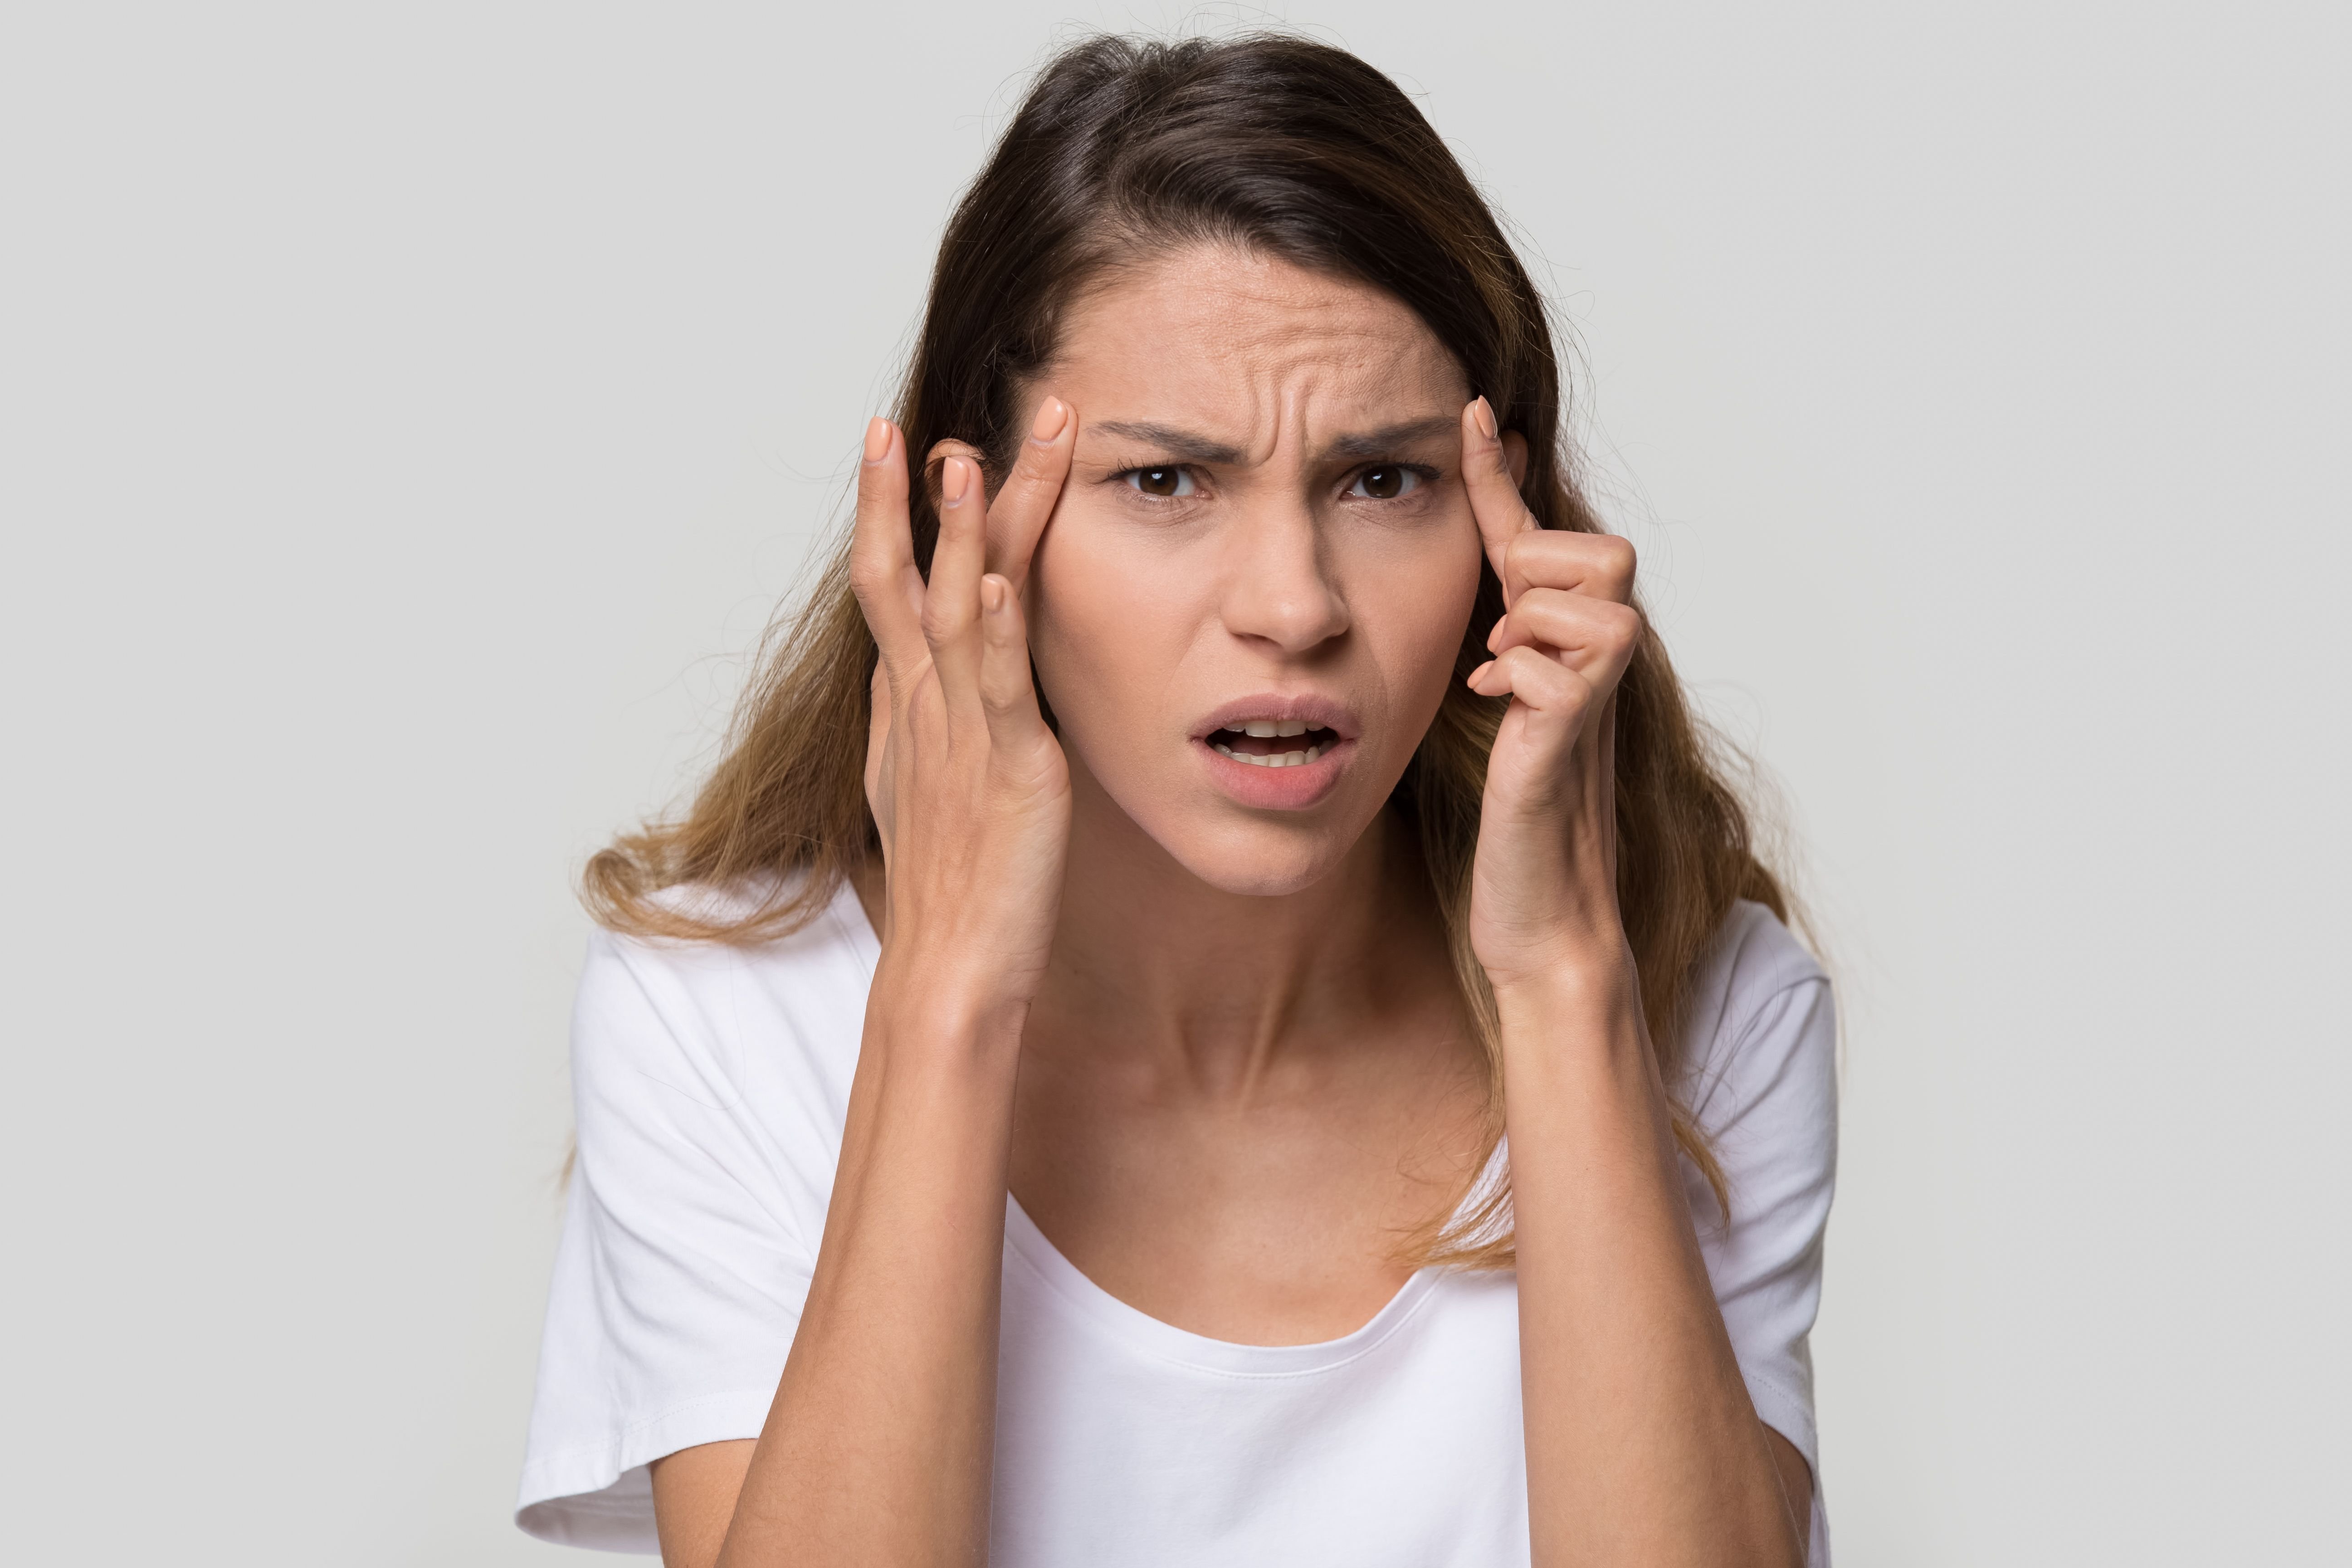 A frustrated woman | Source: Shutterstock